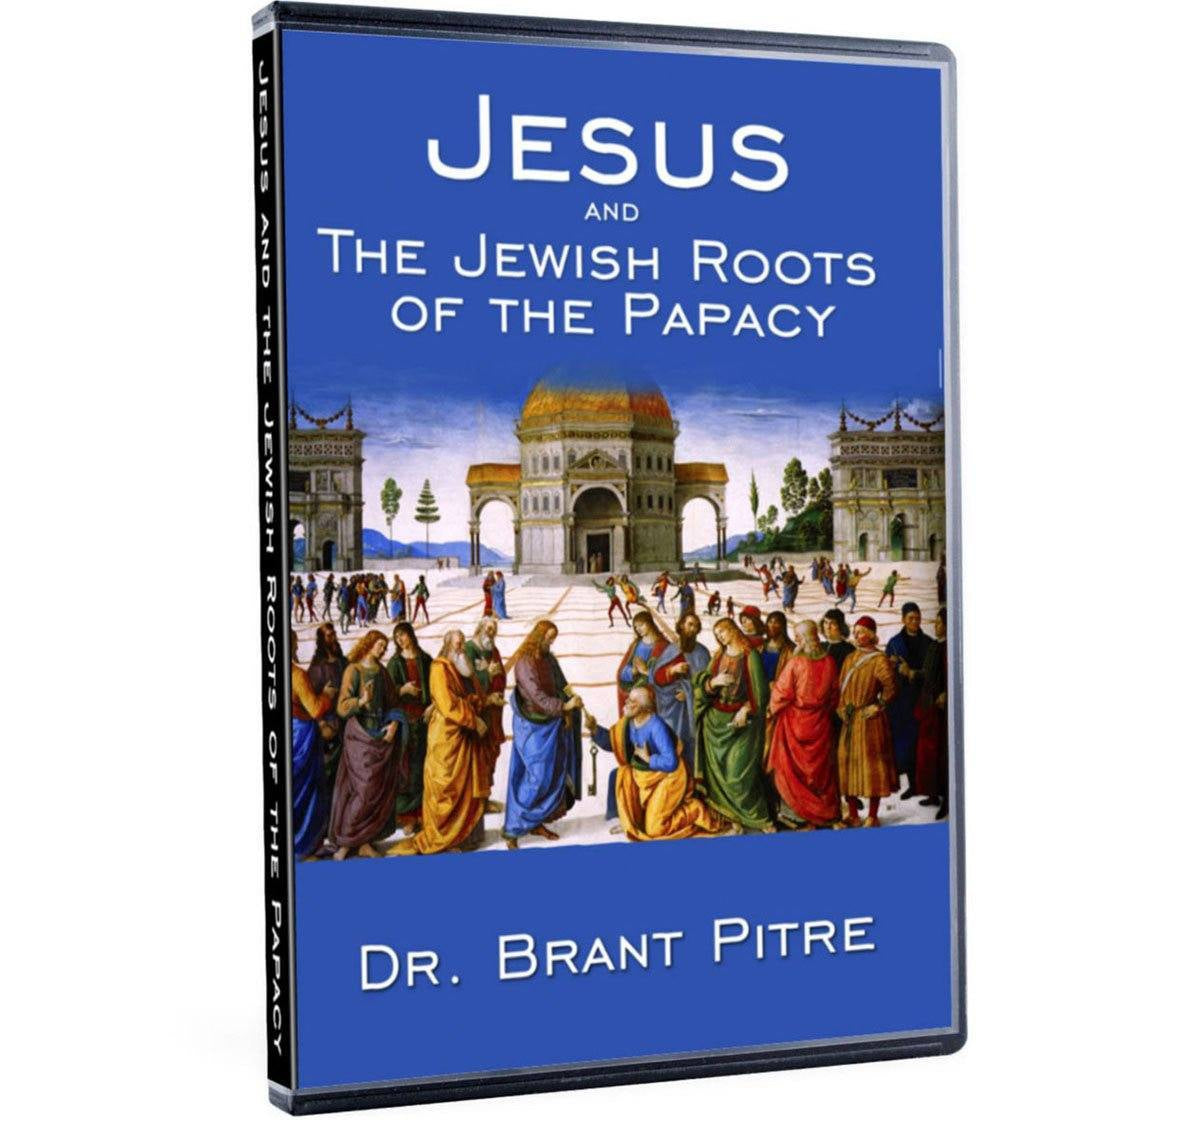 Dr. Brant Pitre shows the connection between Peter as the New Rock and the keys of the Kingdom with Isaiah 22 in this Bible Study on CD.